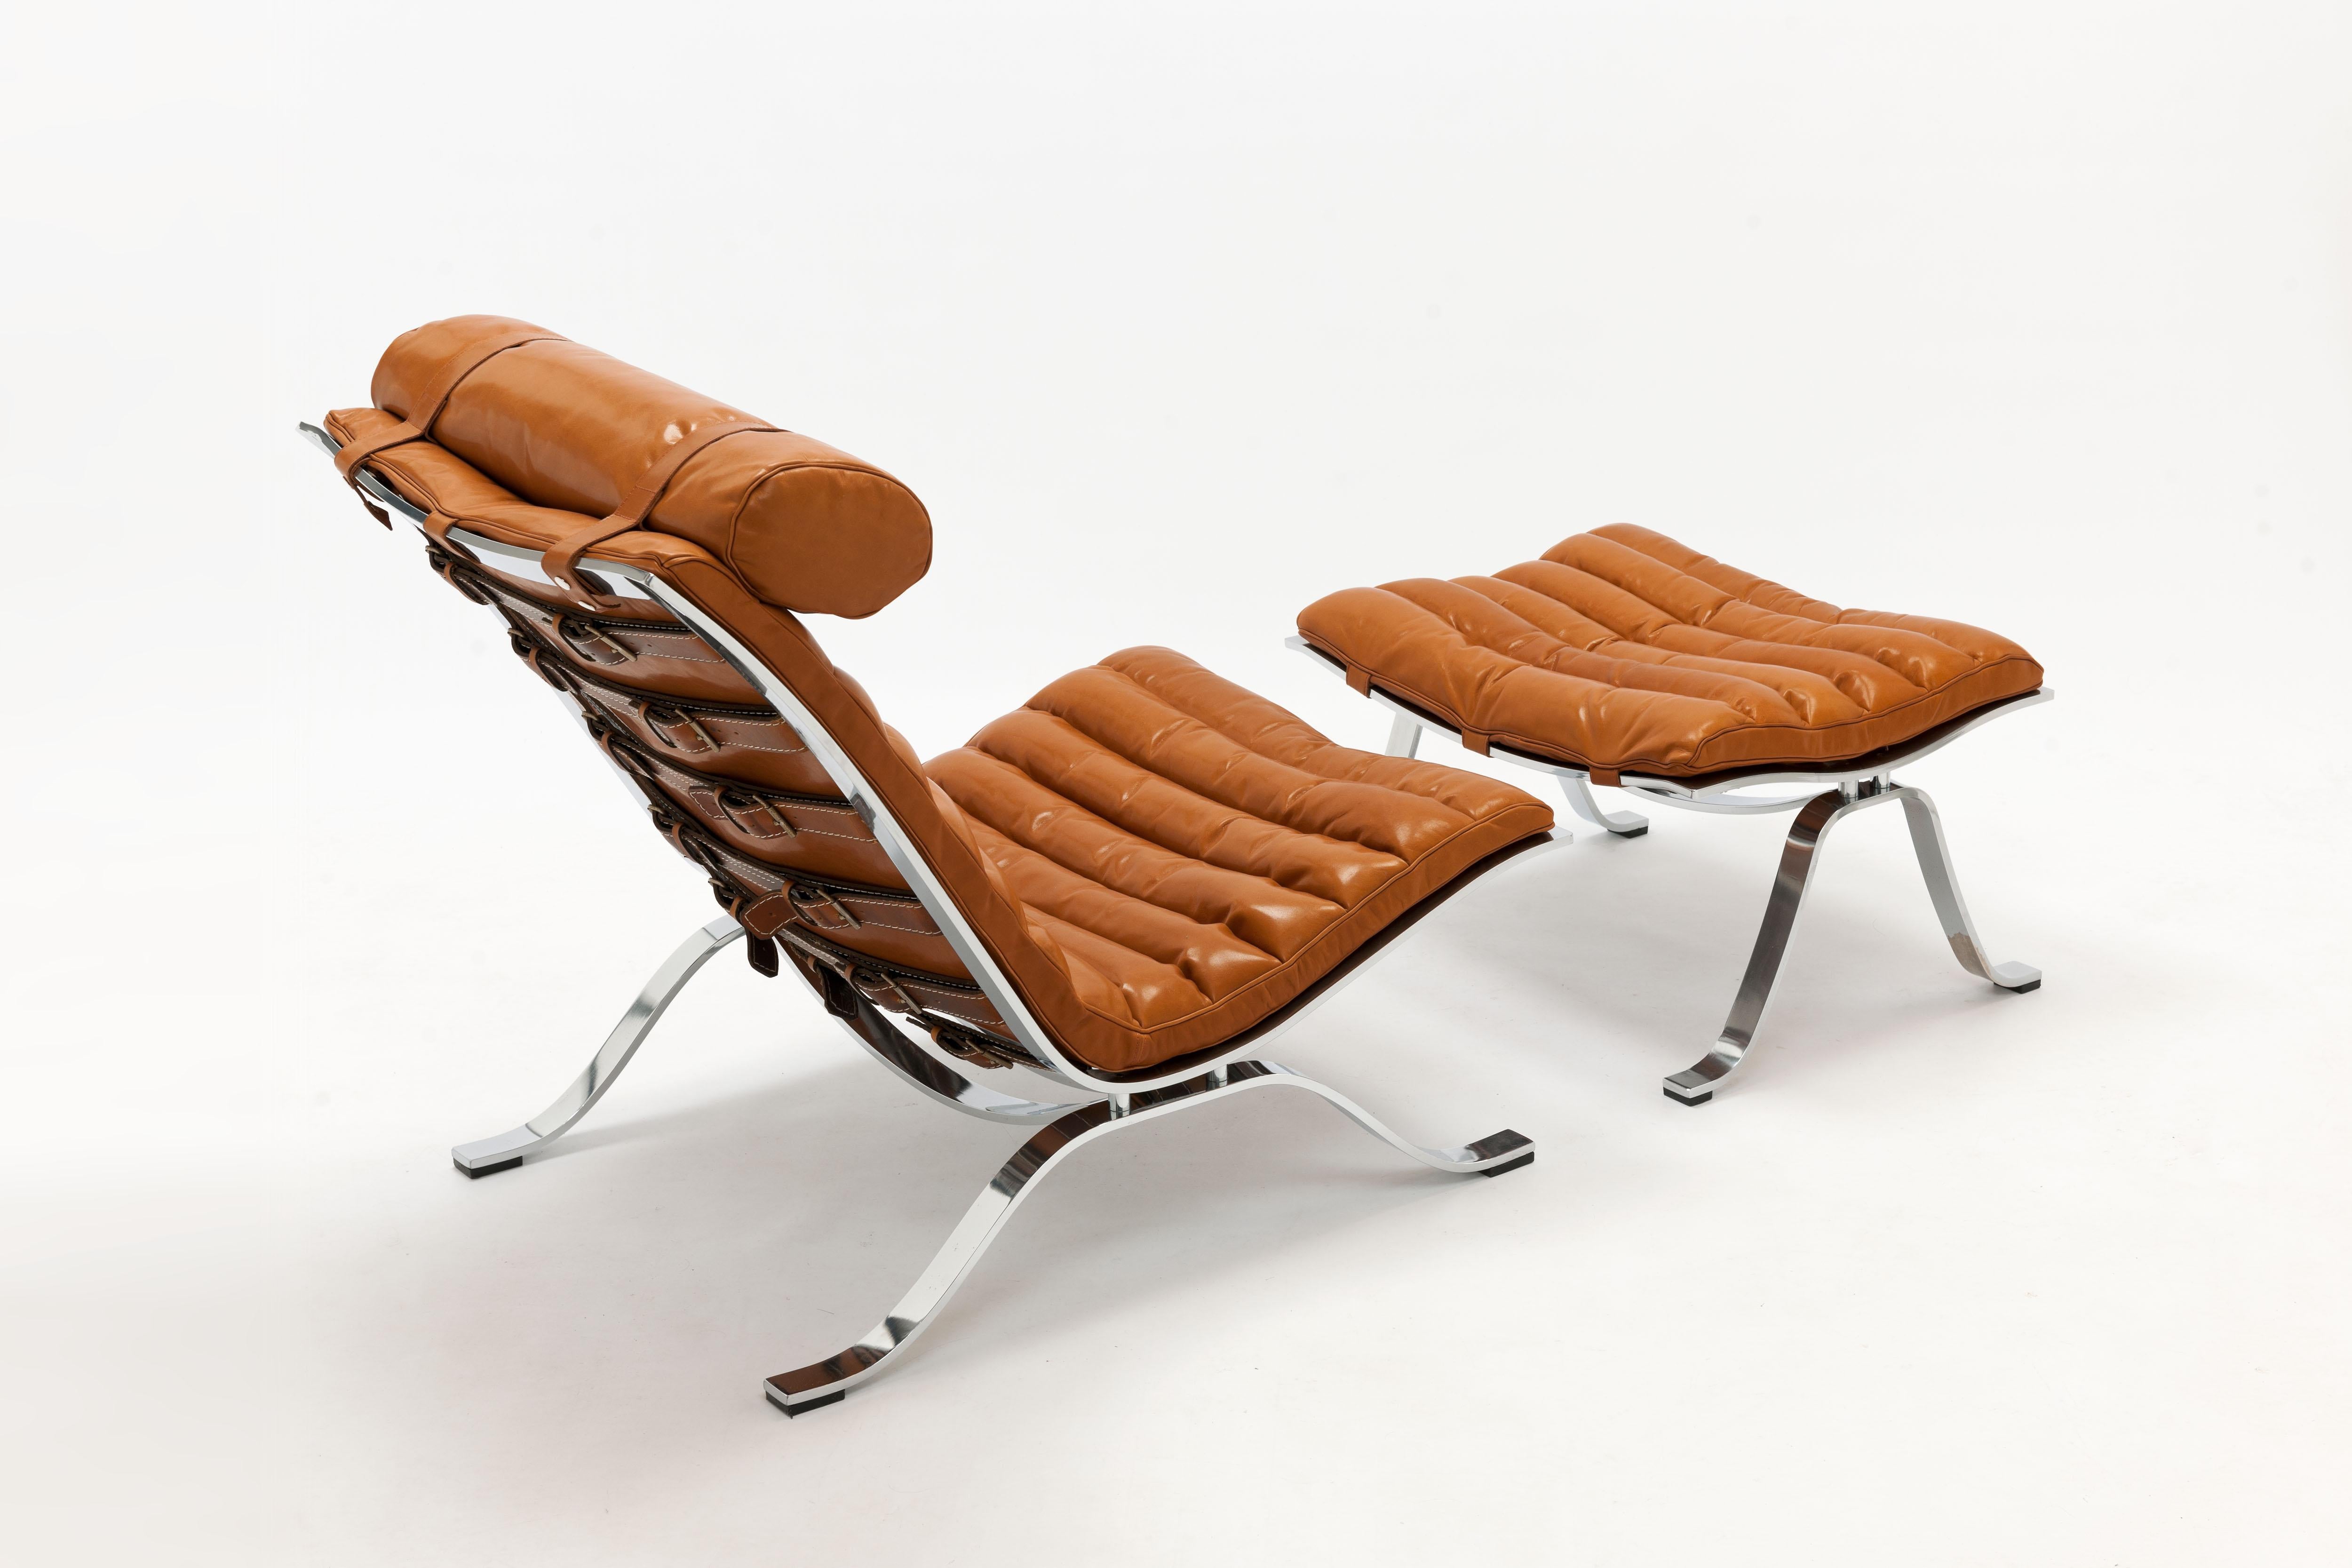 Vintage Ari lounge chair and ottoman with high gloss chrome steel frame designed by Swedish designer Arne Norell in 1966. One of the most timeless iconic and most comfortable designs of the 20th century.

This vintage lounge chair and footstool are